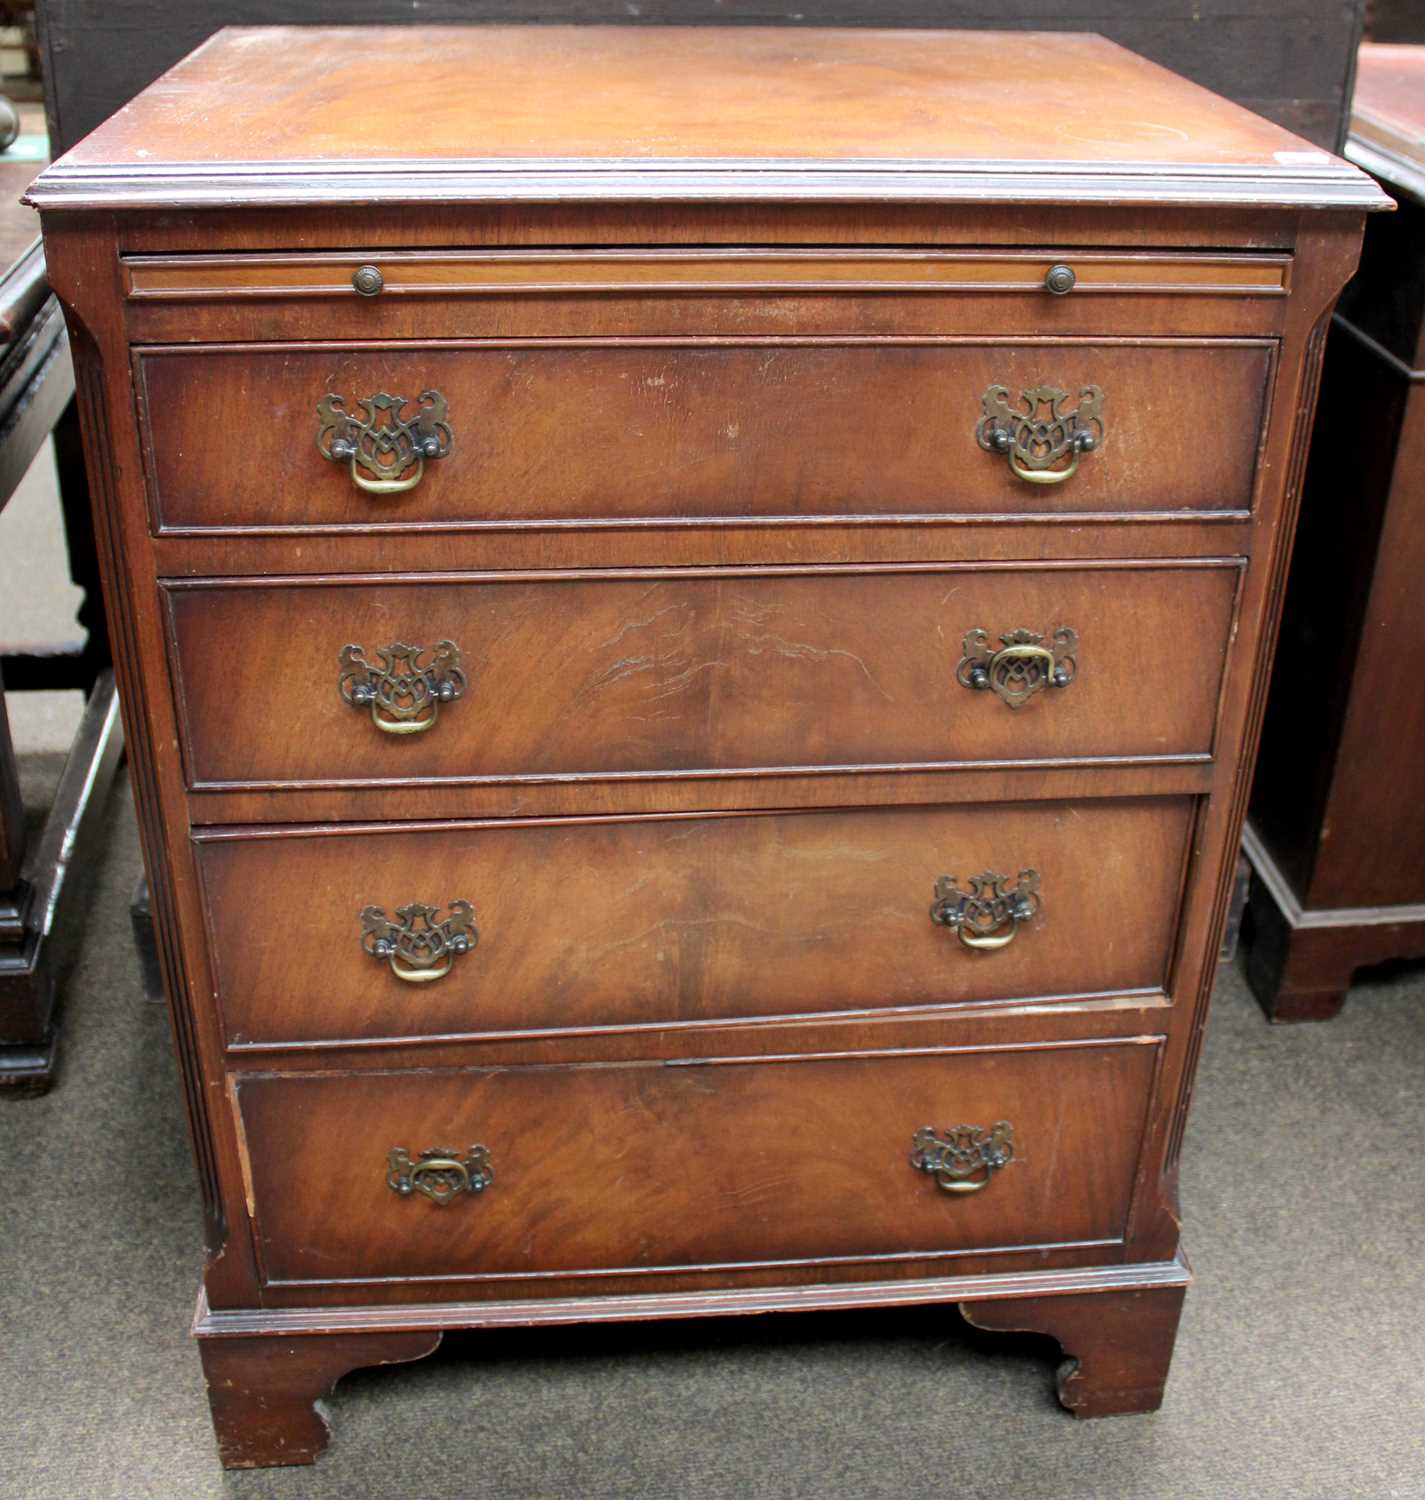 An Early 19th Century Mahogany and Crossbanded Bowfront Chest of Three Drawers, 90cm by 93cm by - Image 2 of 3